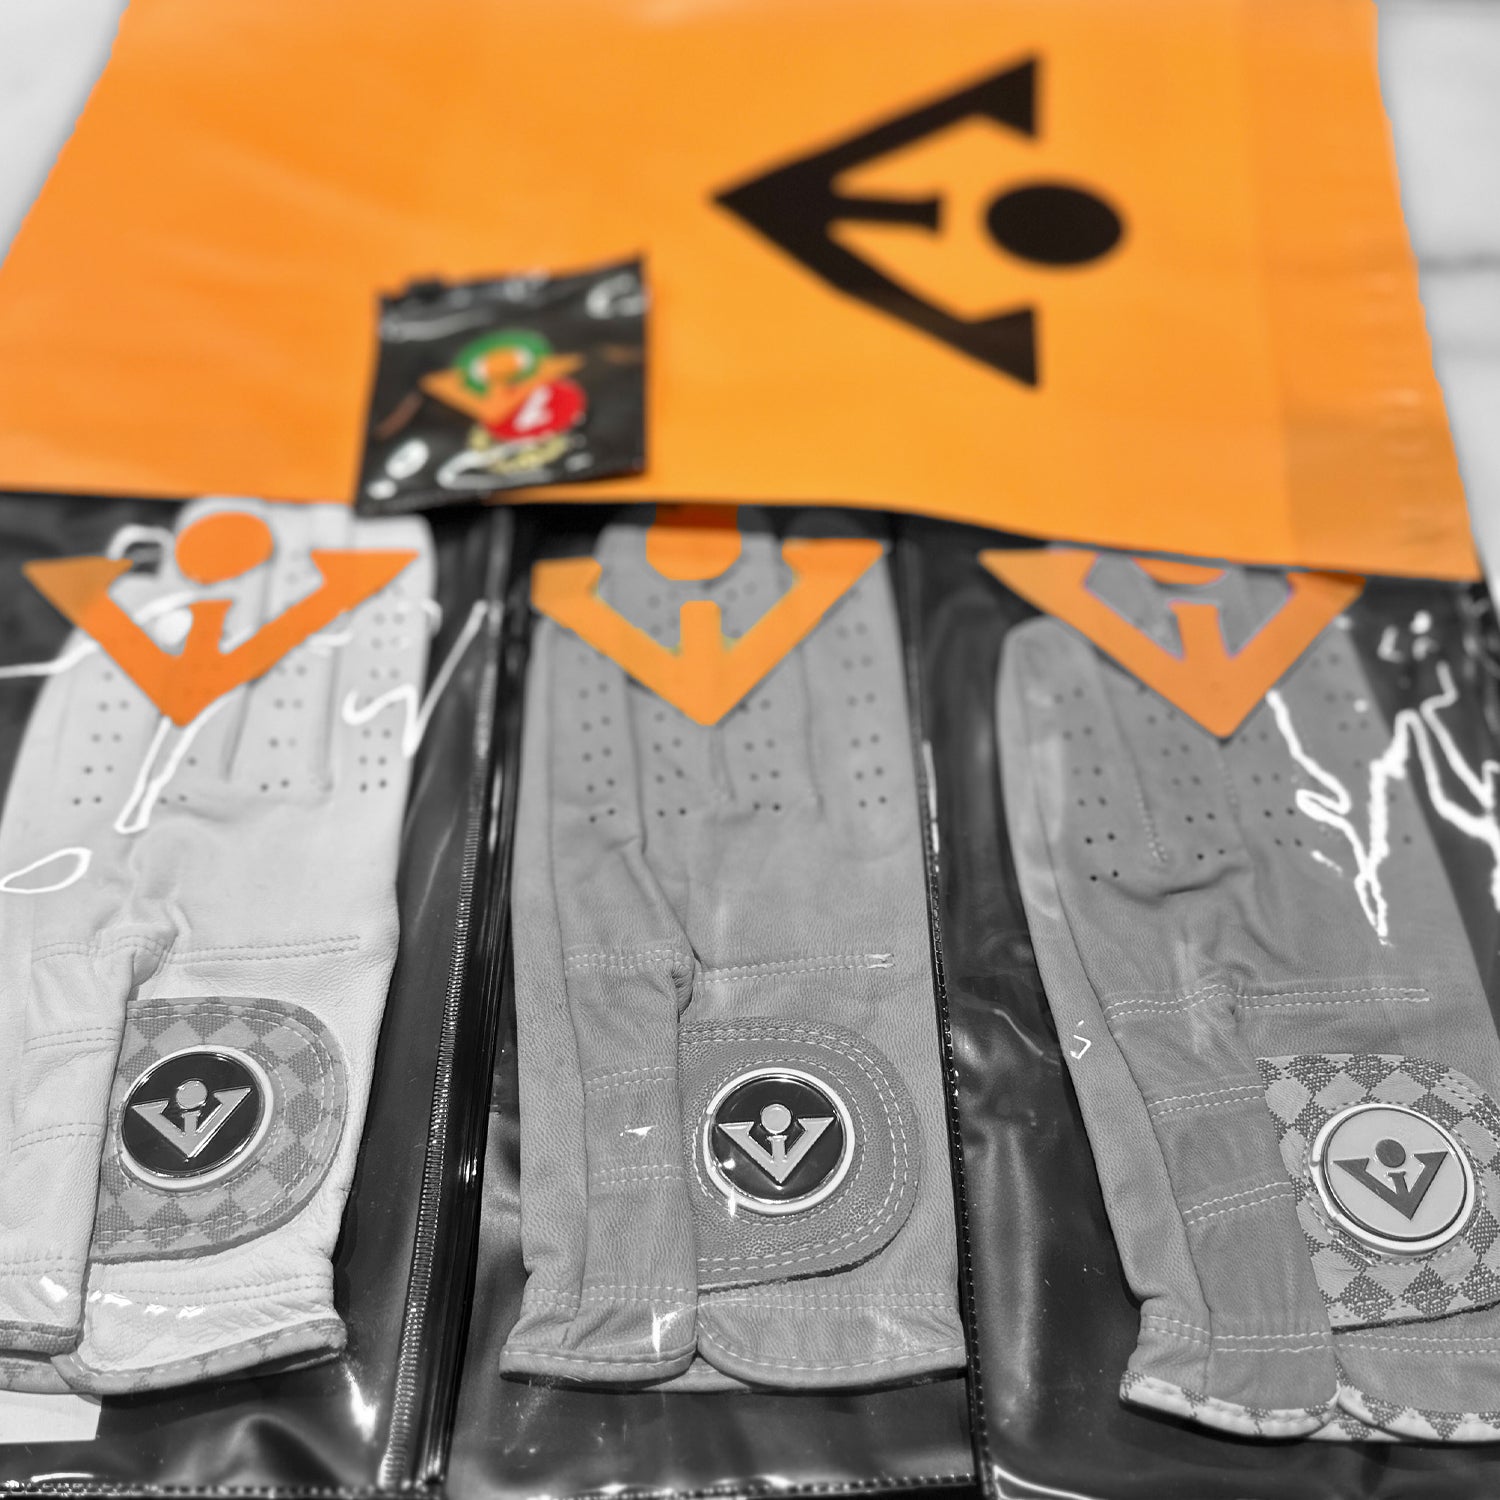 VivanTee golf gloves with ball markers in their packaging with the only colors in non black and white is the logo and our mailer back in orange.